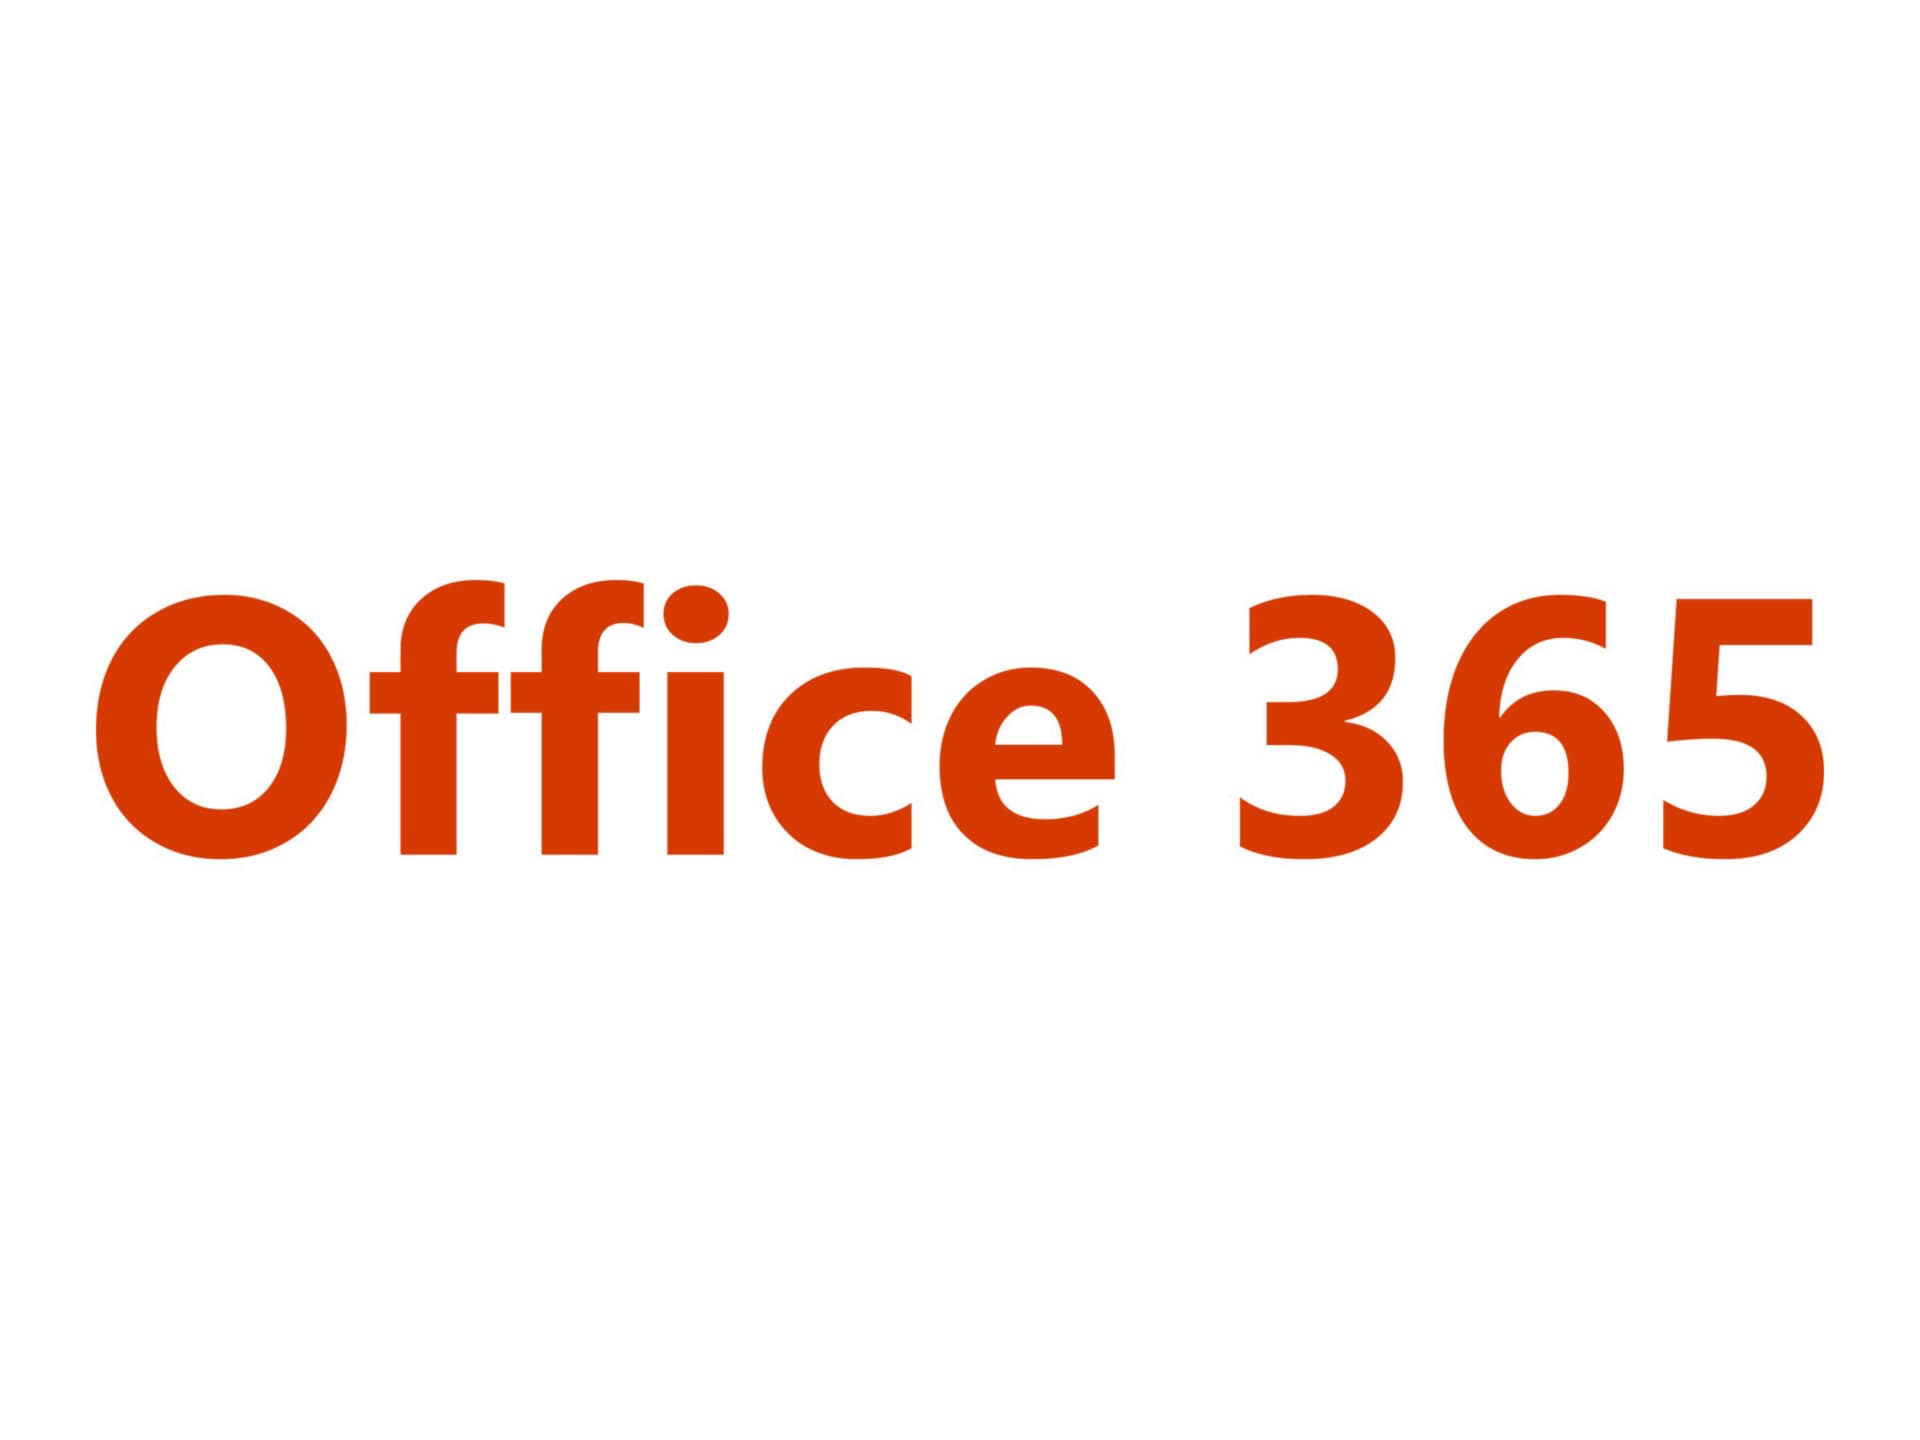 Microsoft Office 365 Pro Plus A - subscription license (1 month) - 1 user